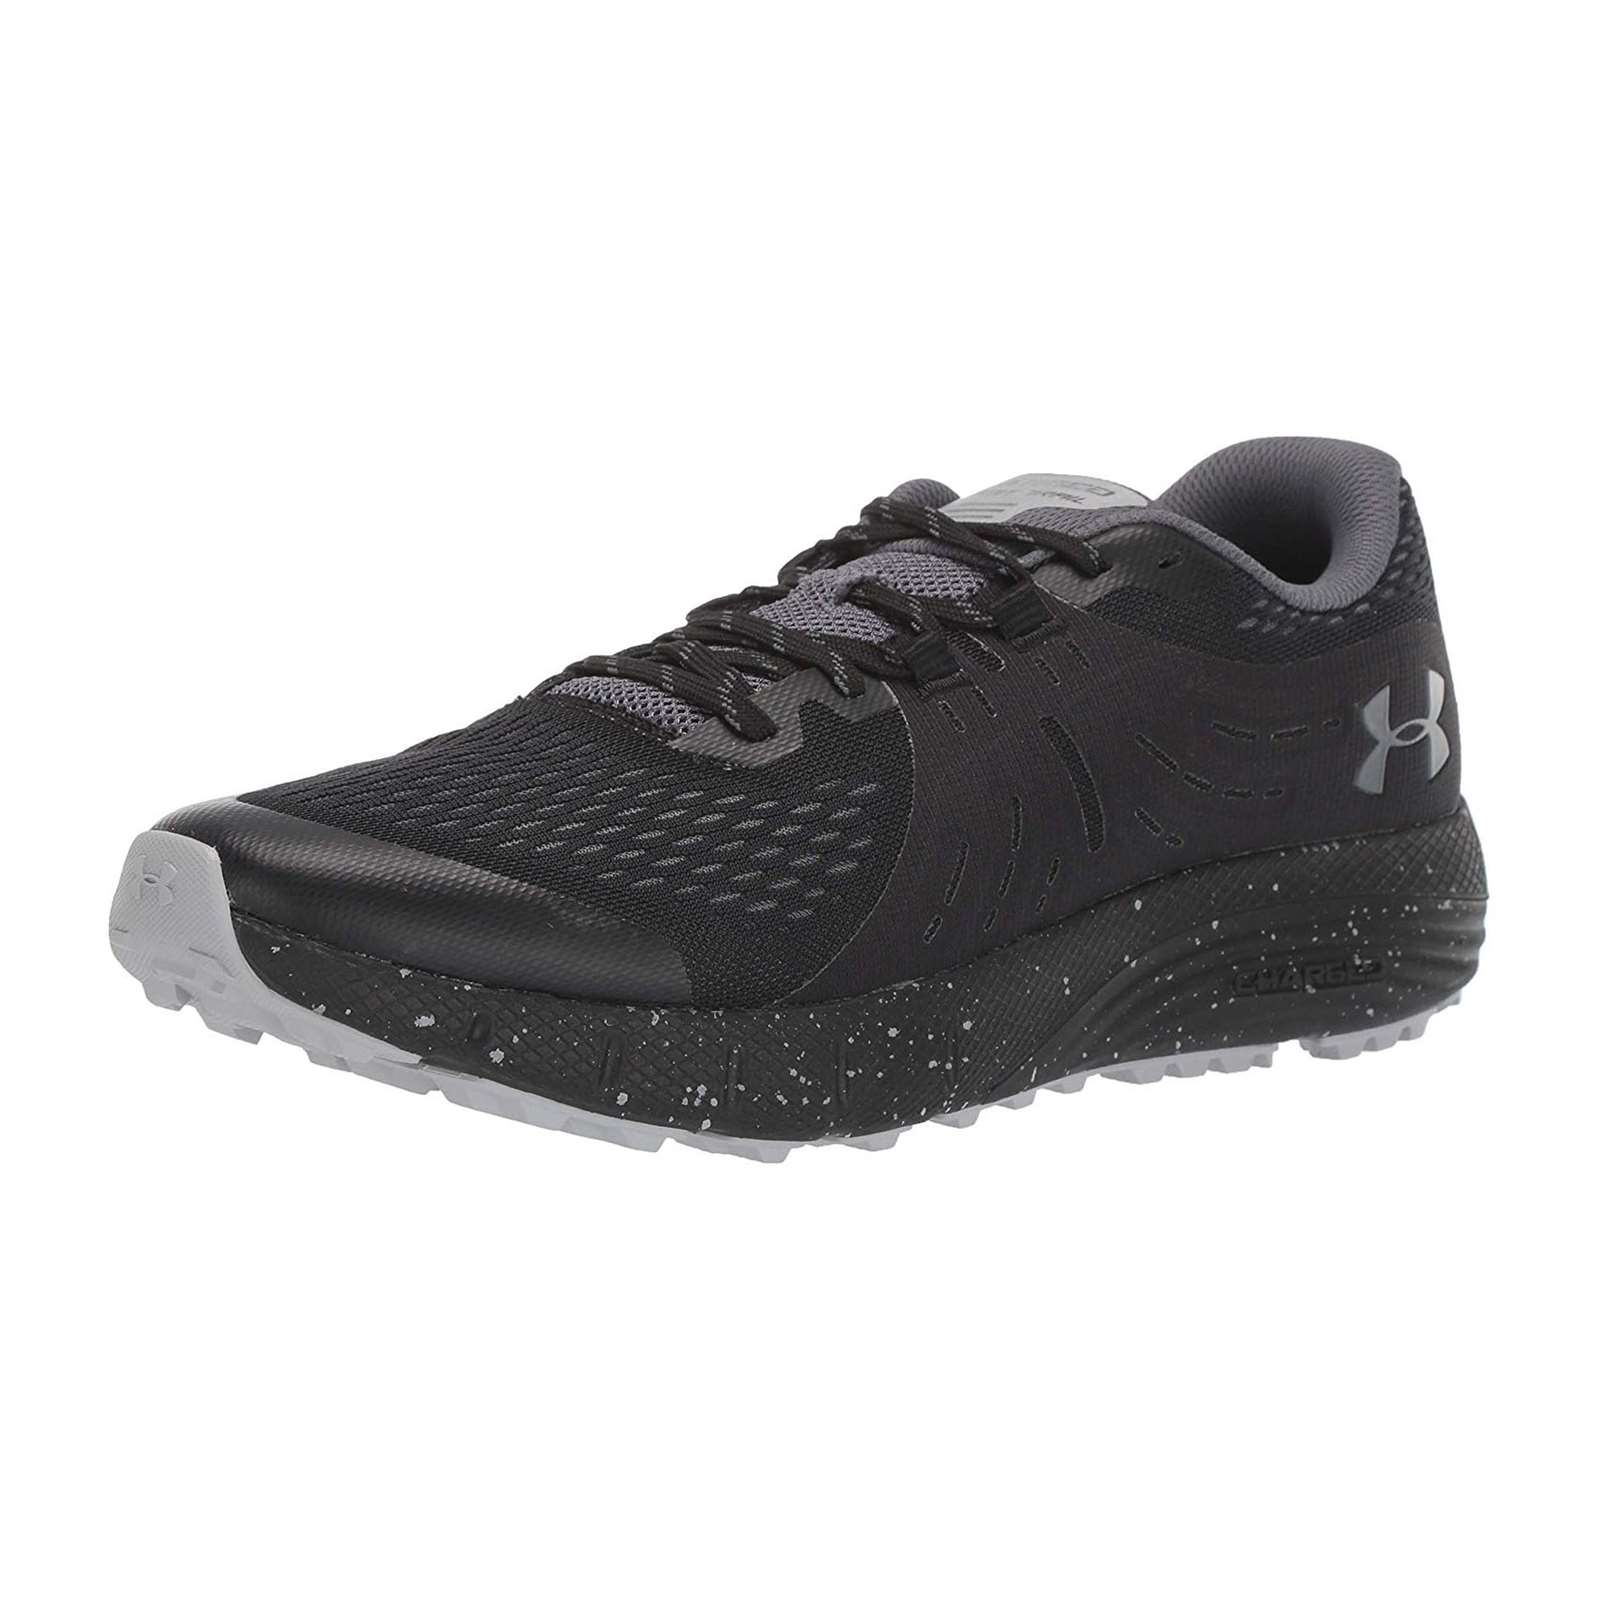 Men's Under Armour Charged Bandit Trail Running Shoe - image 2 of 7